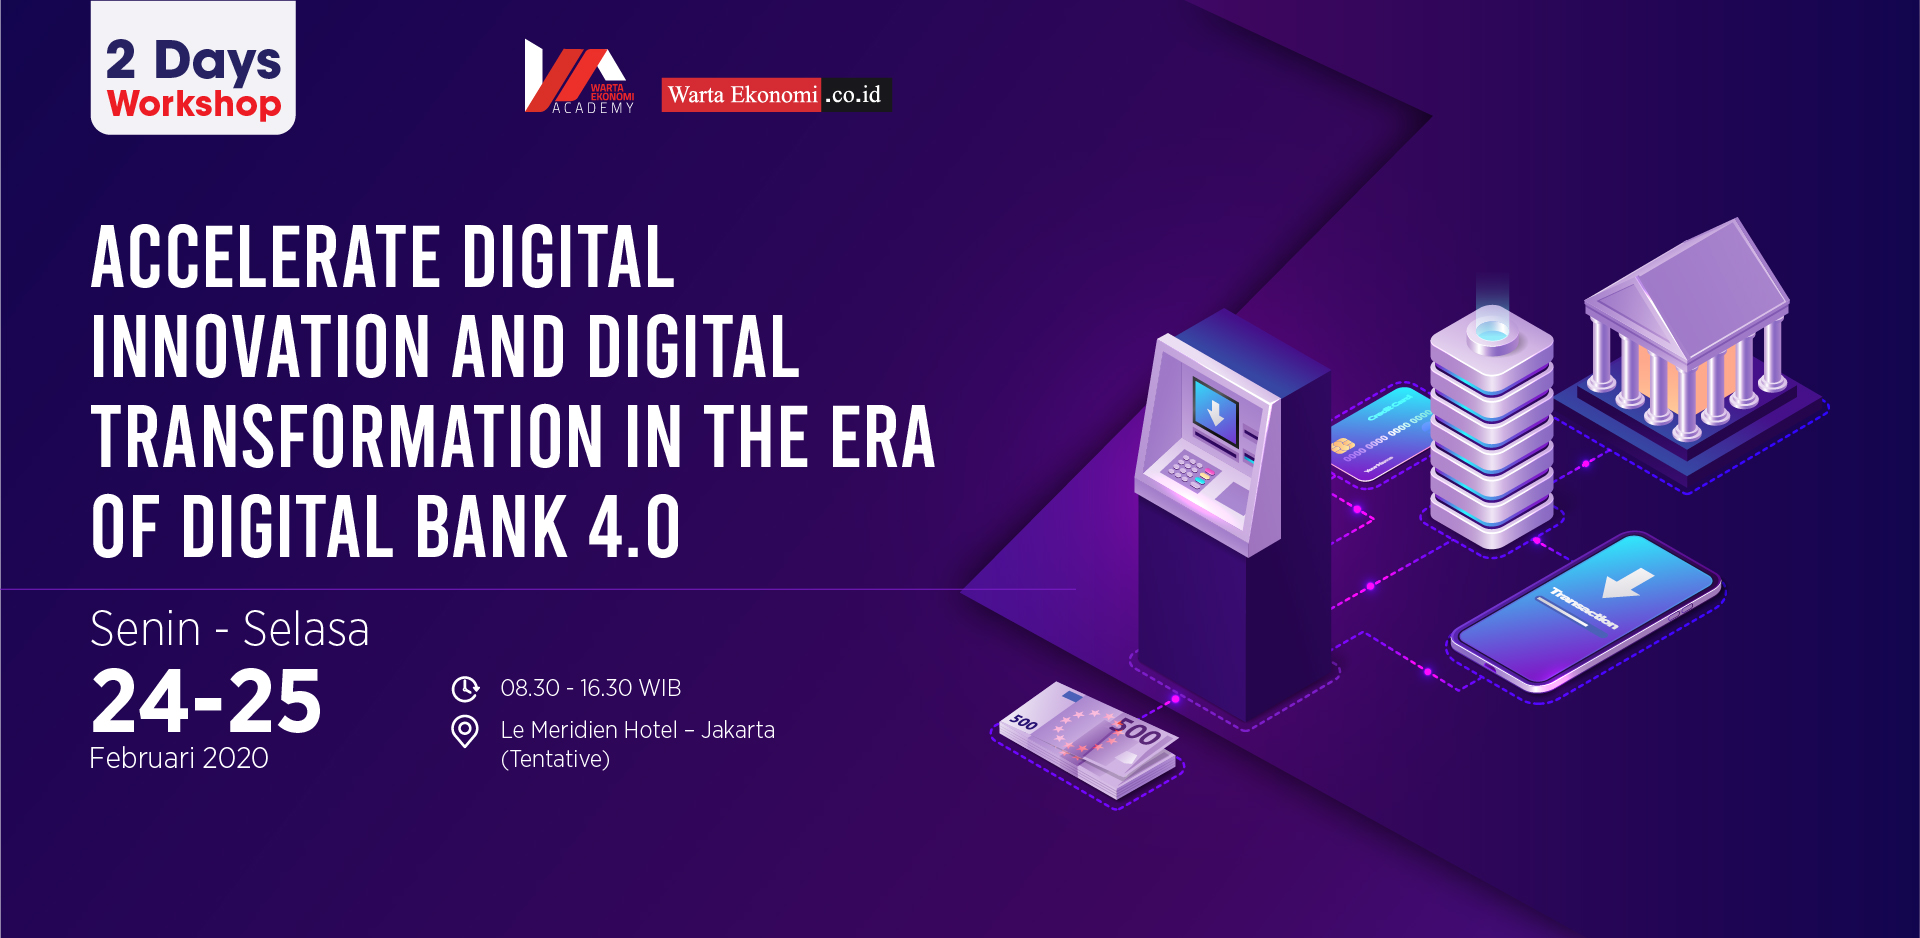 DO or DIE : Accelerate Digital Innovation And Digital Transformation In The Era Of Digital Bank 4.0